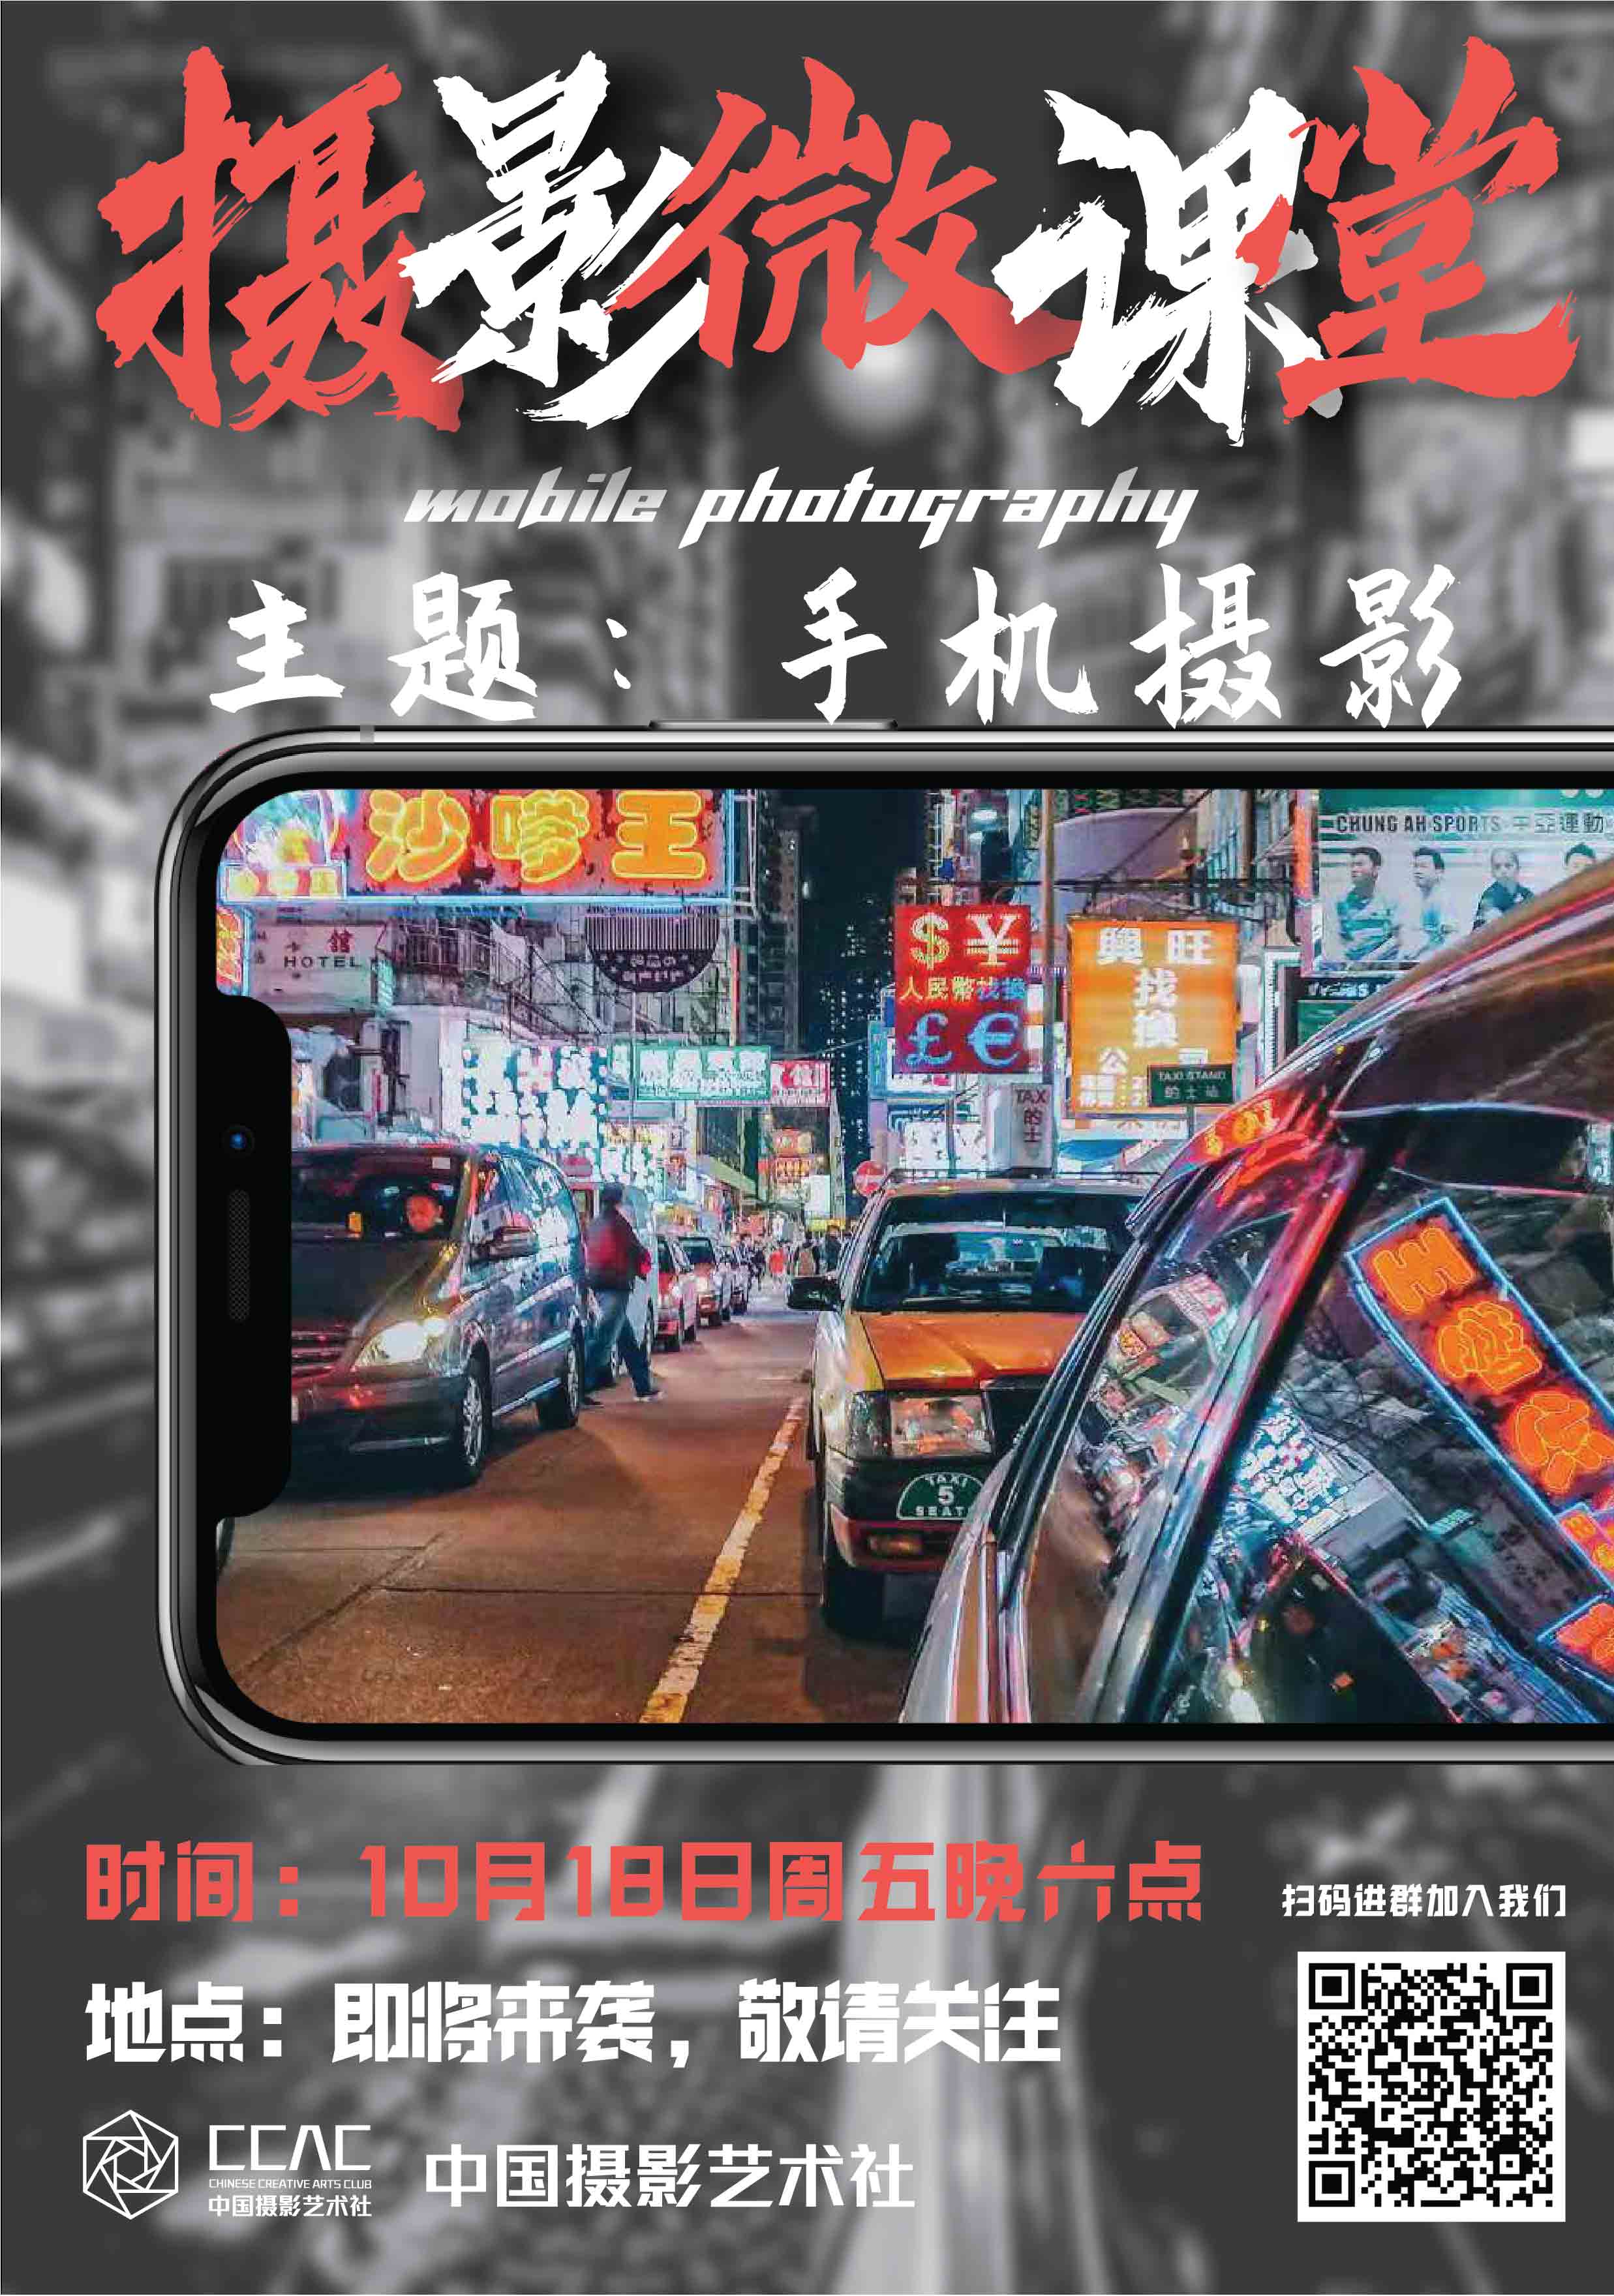 activity poster with a scenery of neon lights in the city